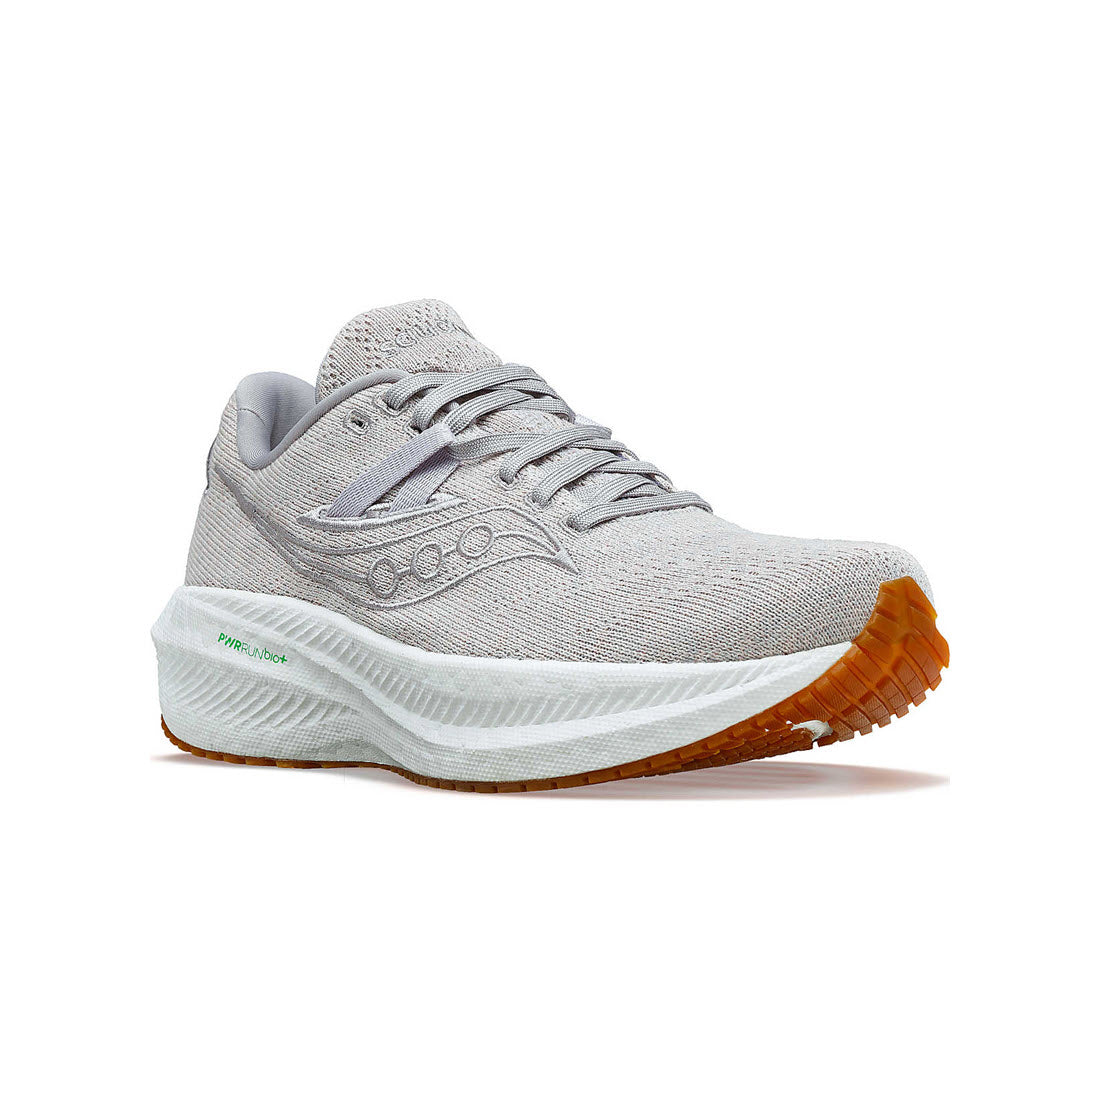 A single Saucony Triumph RFG Mauve running shoe with a white foam sole and orange tread made from sustainable cushioning, featuring a visible logo on the side.